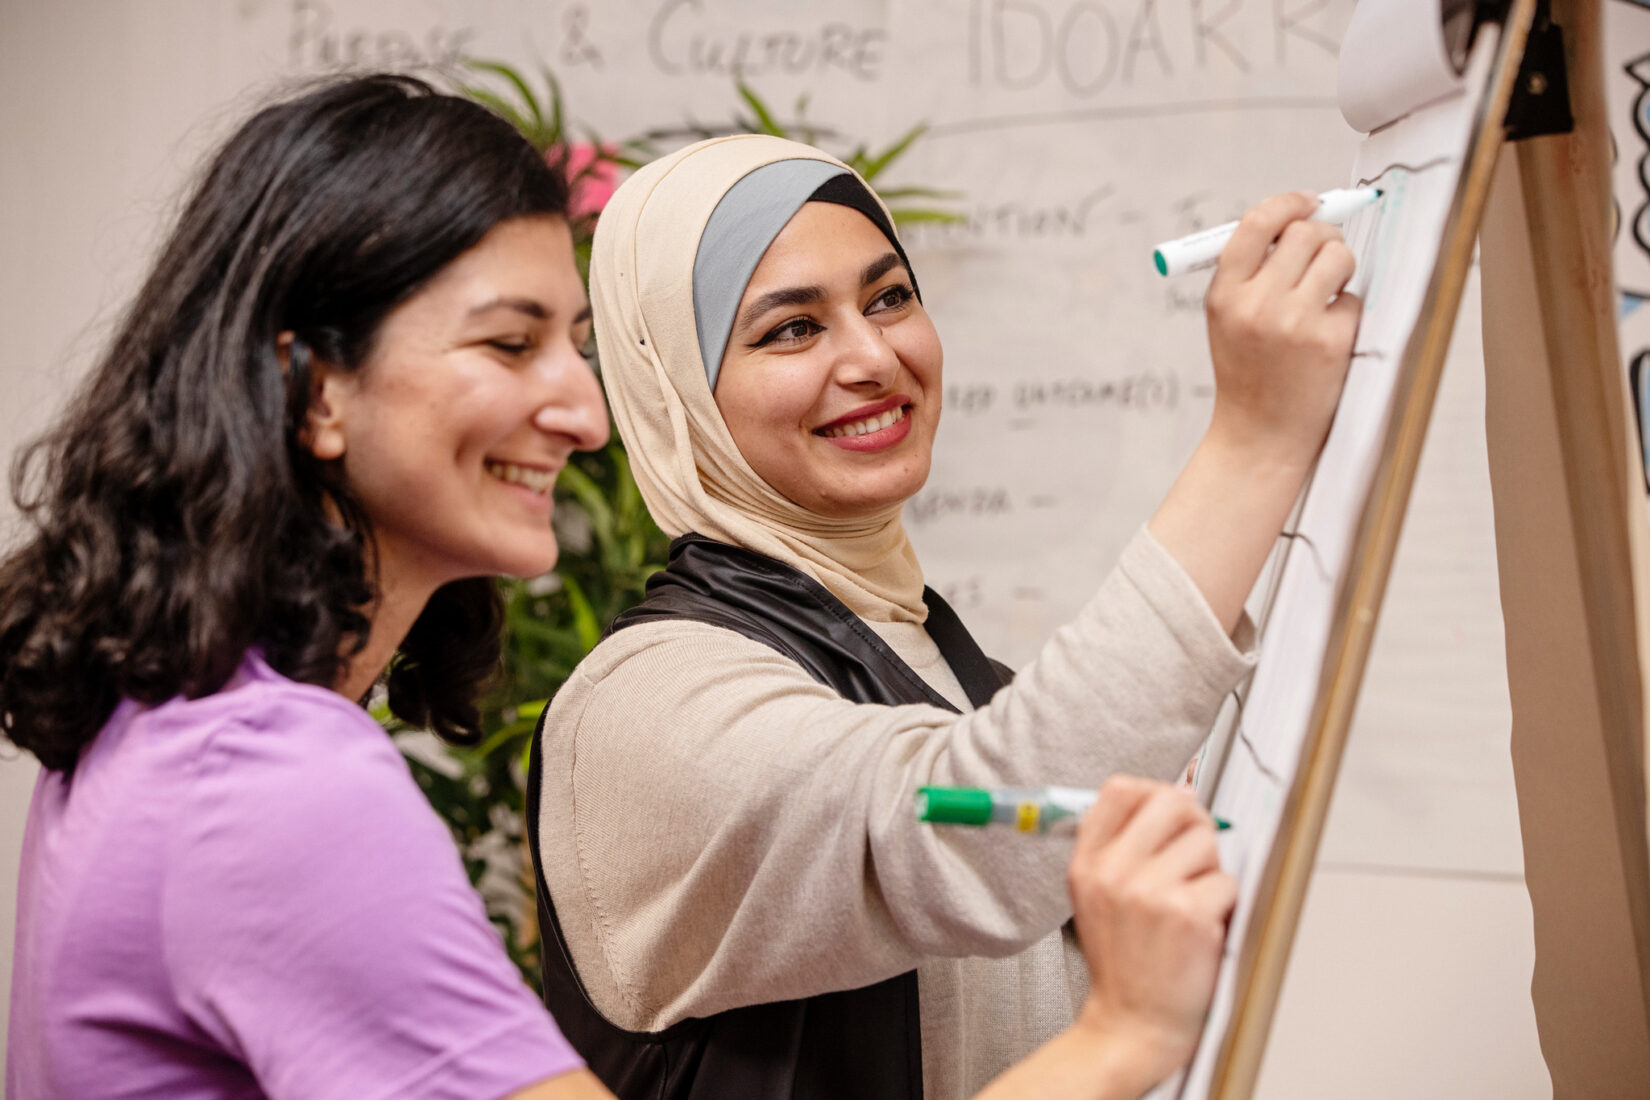 Two women writing on a whiteboard. The one in the front has dark hair and a purple t-shirt. The one in the background wears hijab. Both look happy and seem to enjoy their company..